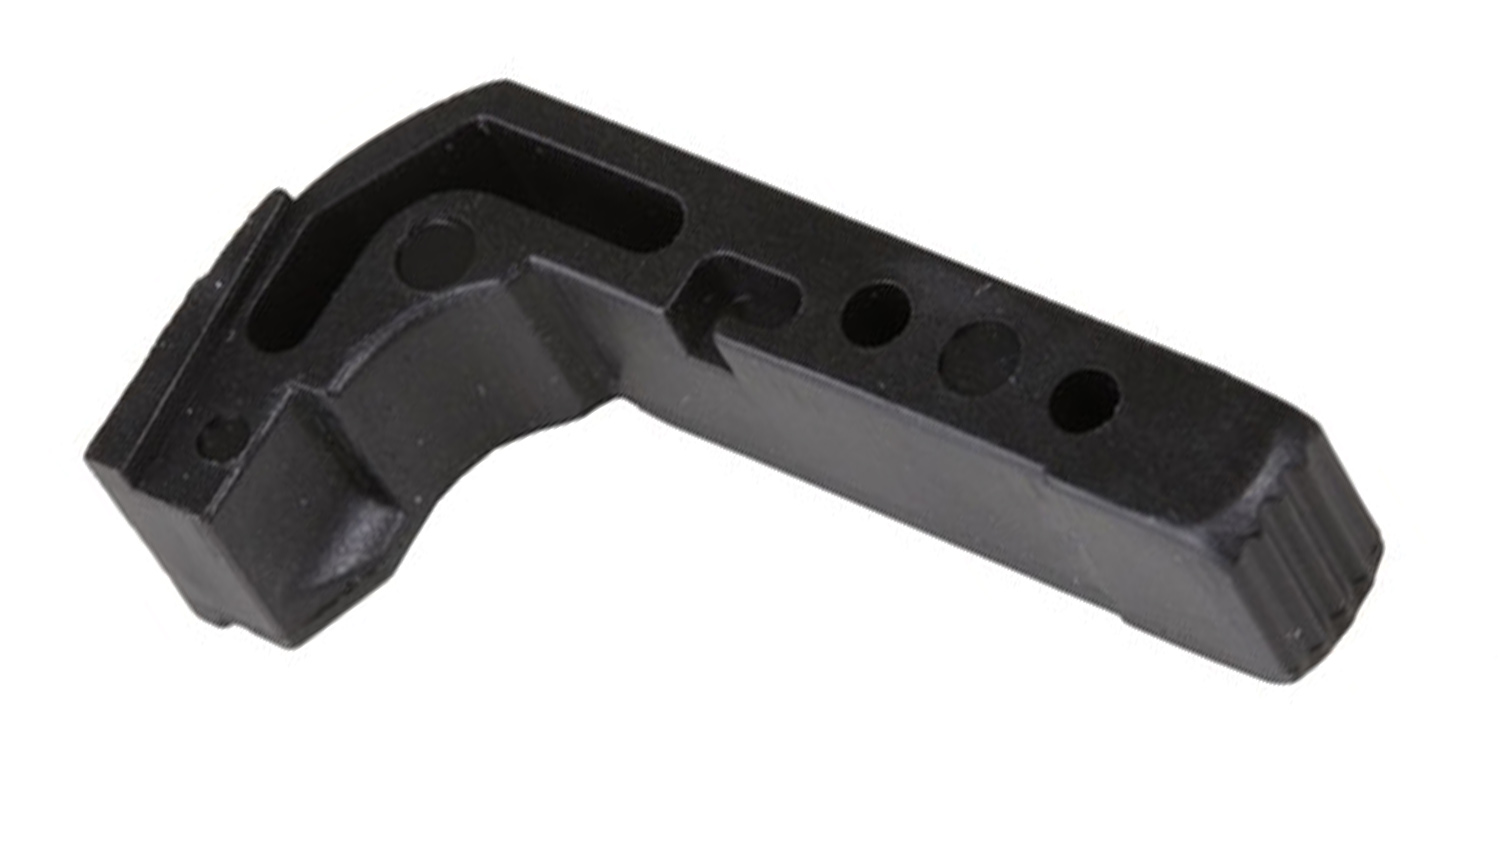 Vickers Glock extended mag release